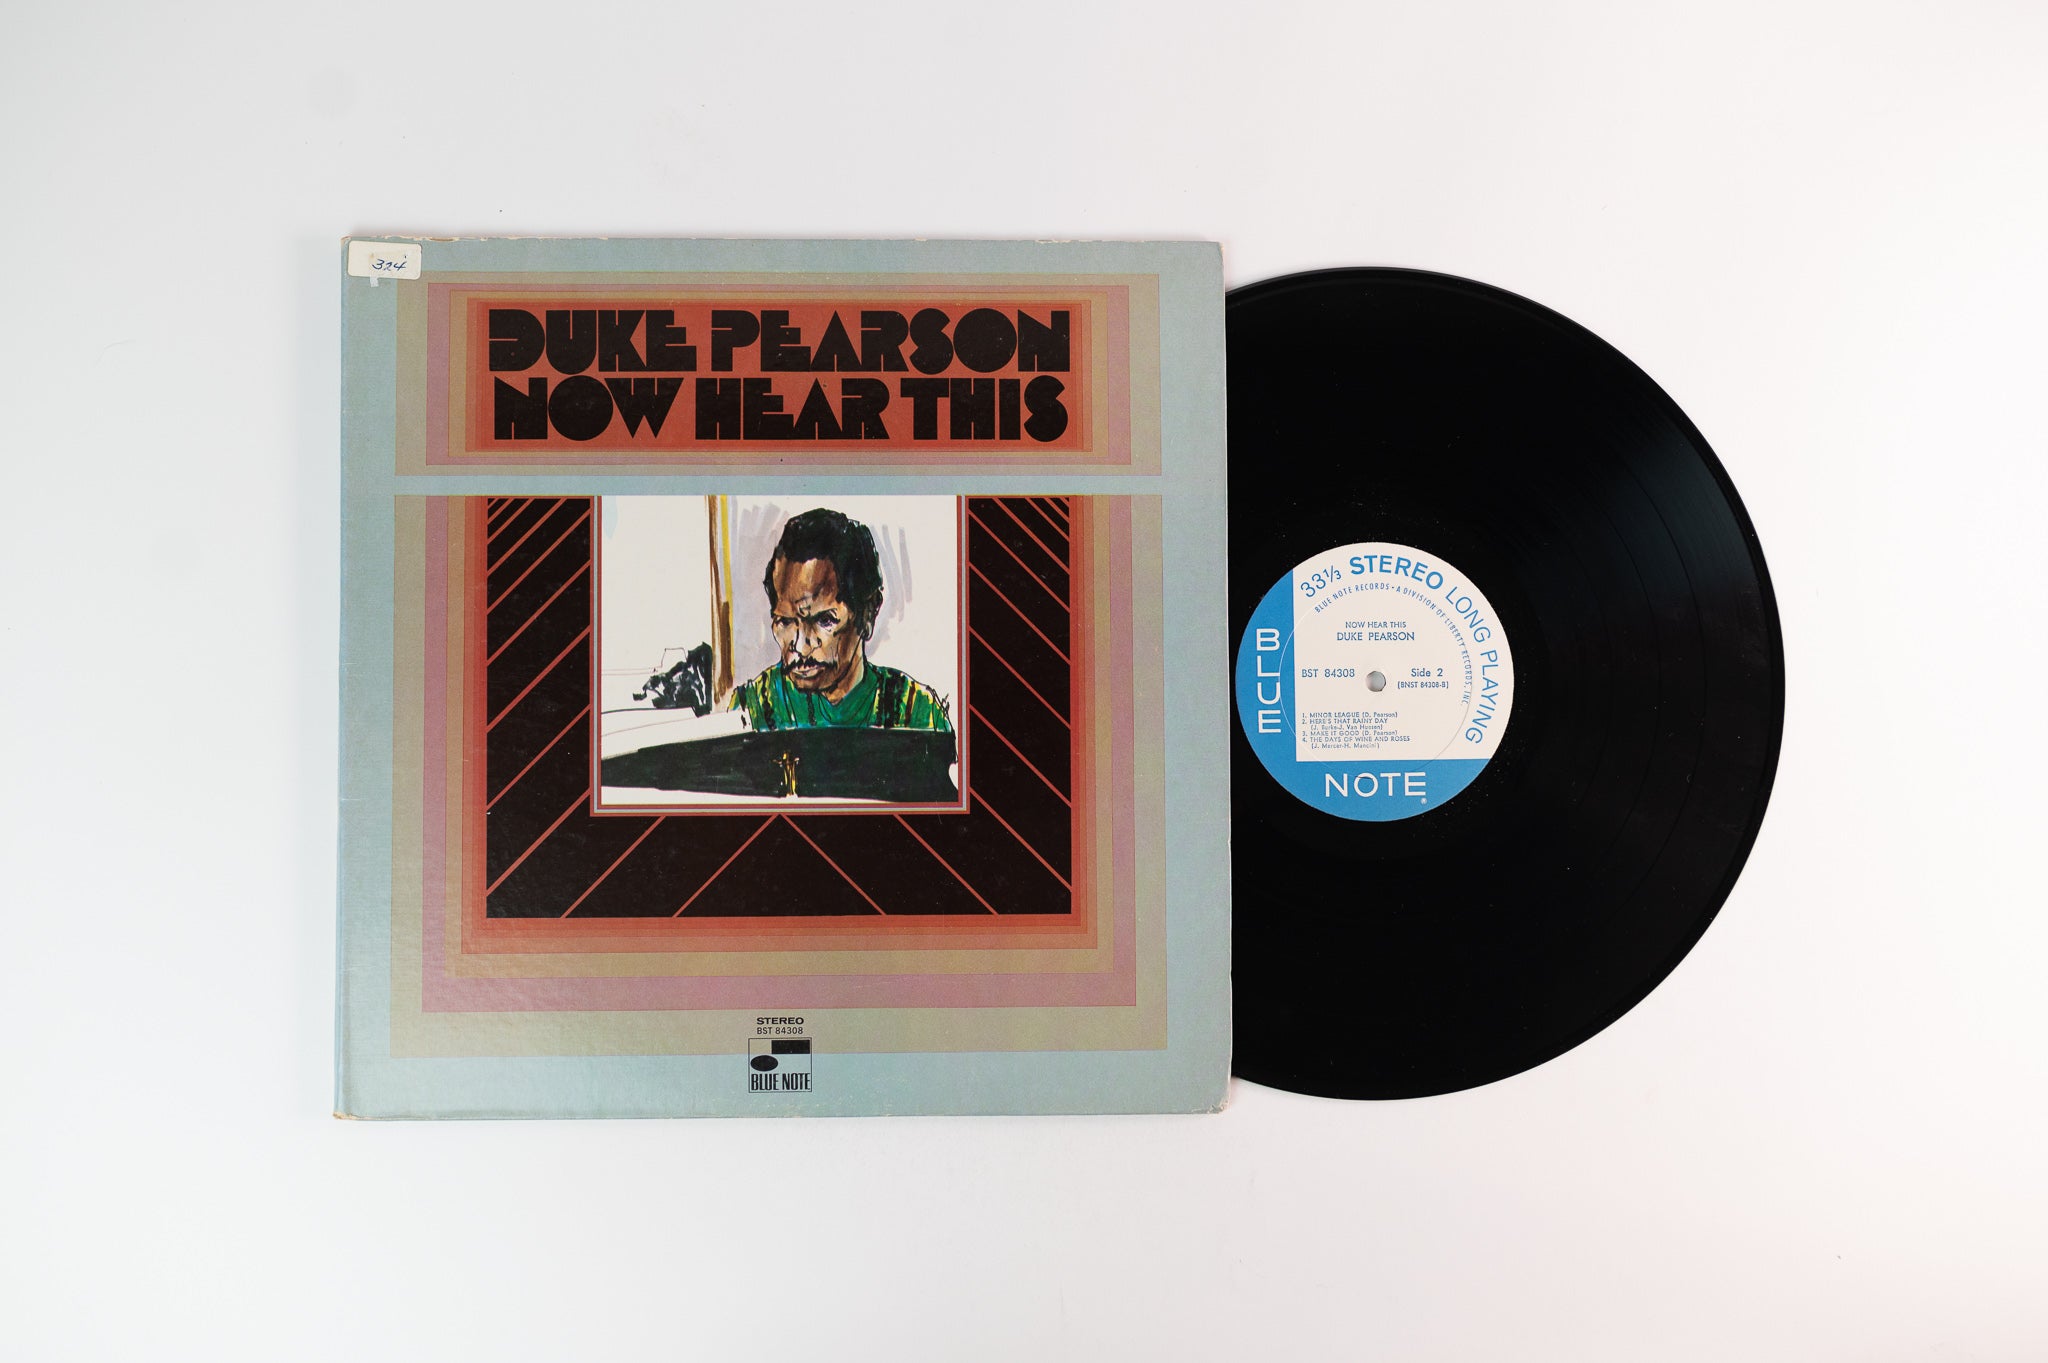 Duke Pearson - Now Hear This on Blue Note Liberty Stereo